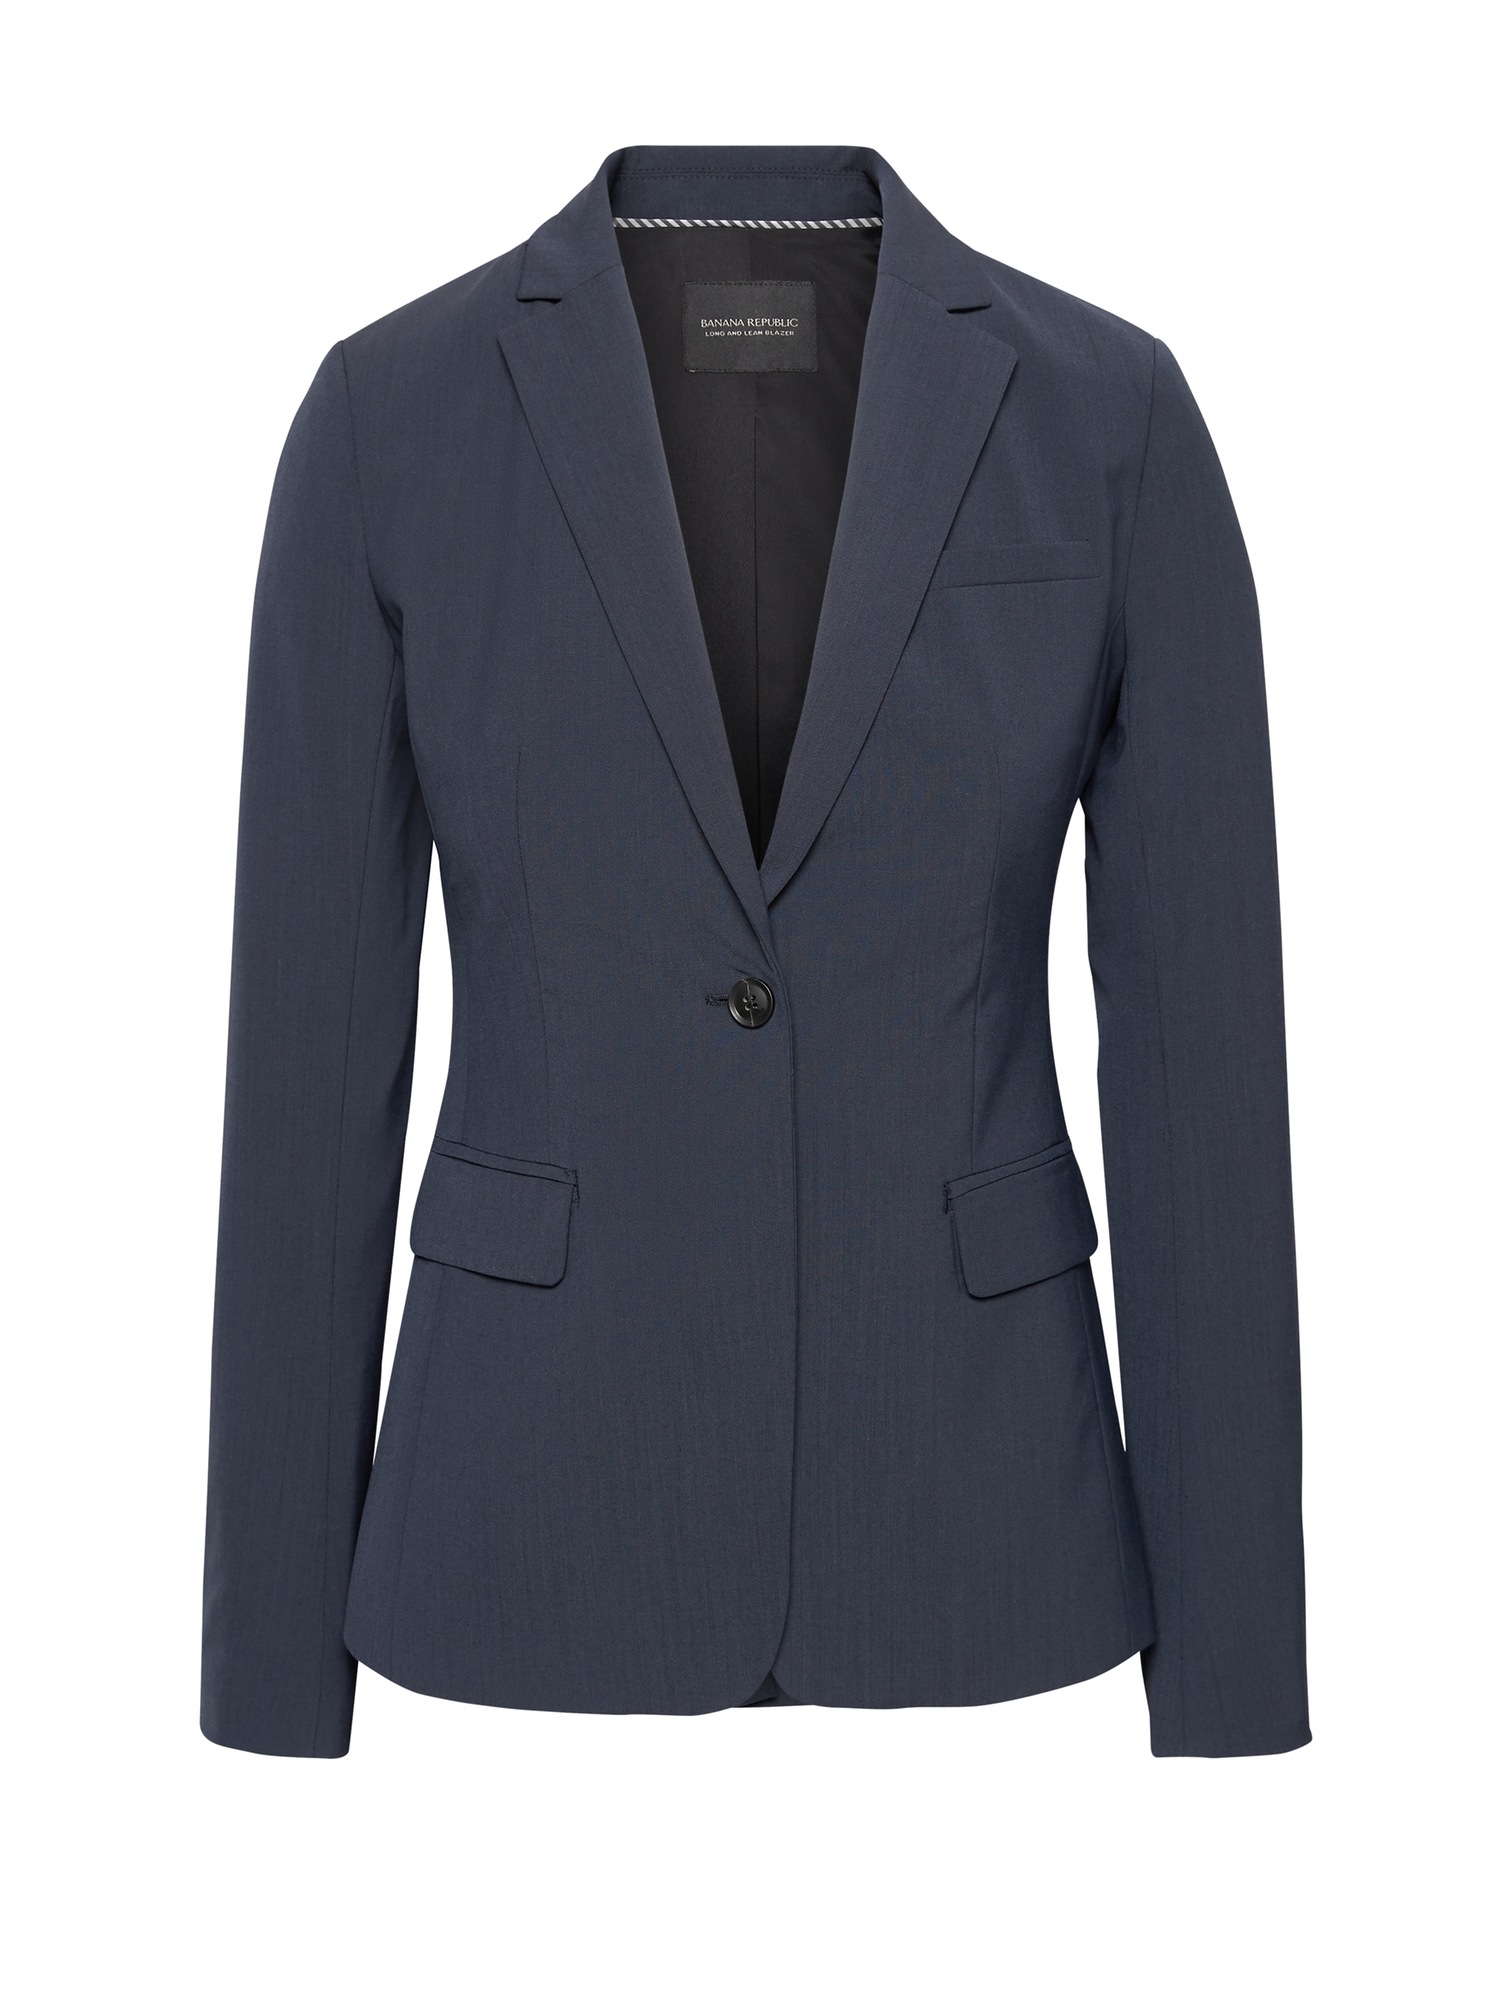 Long and Lean-Fit Washable Italian Wool-Blend Blazer